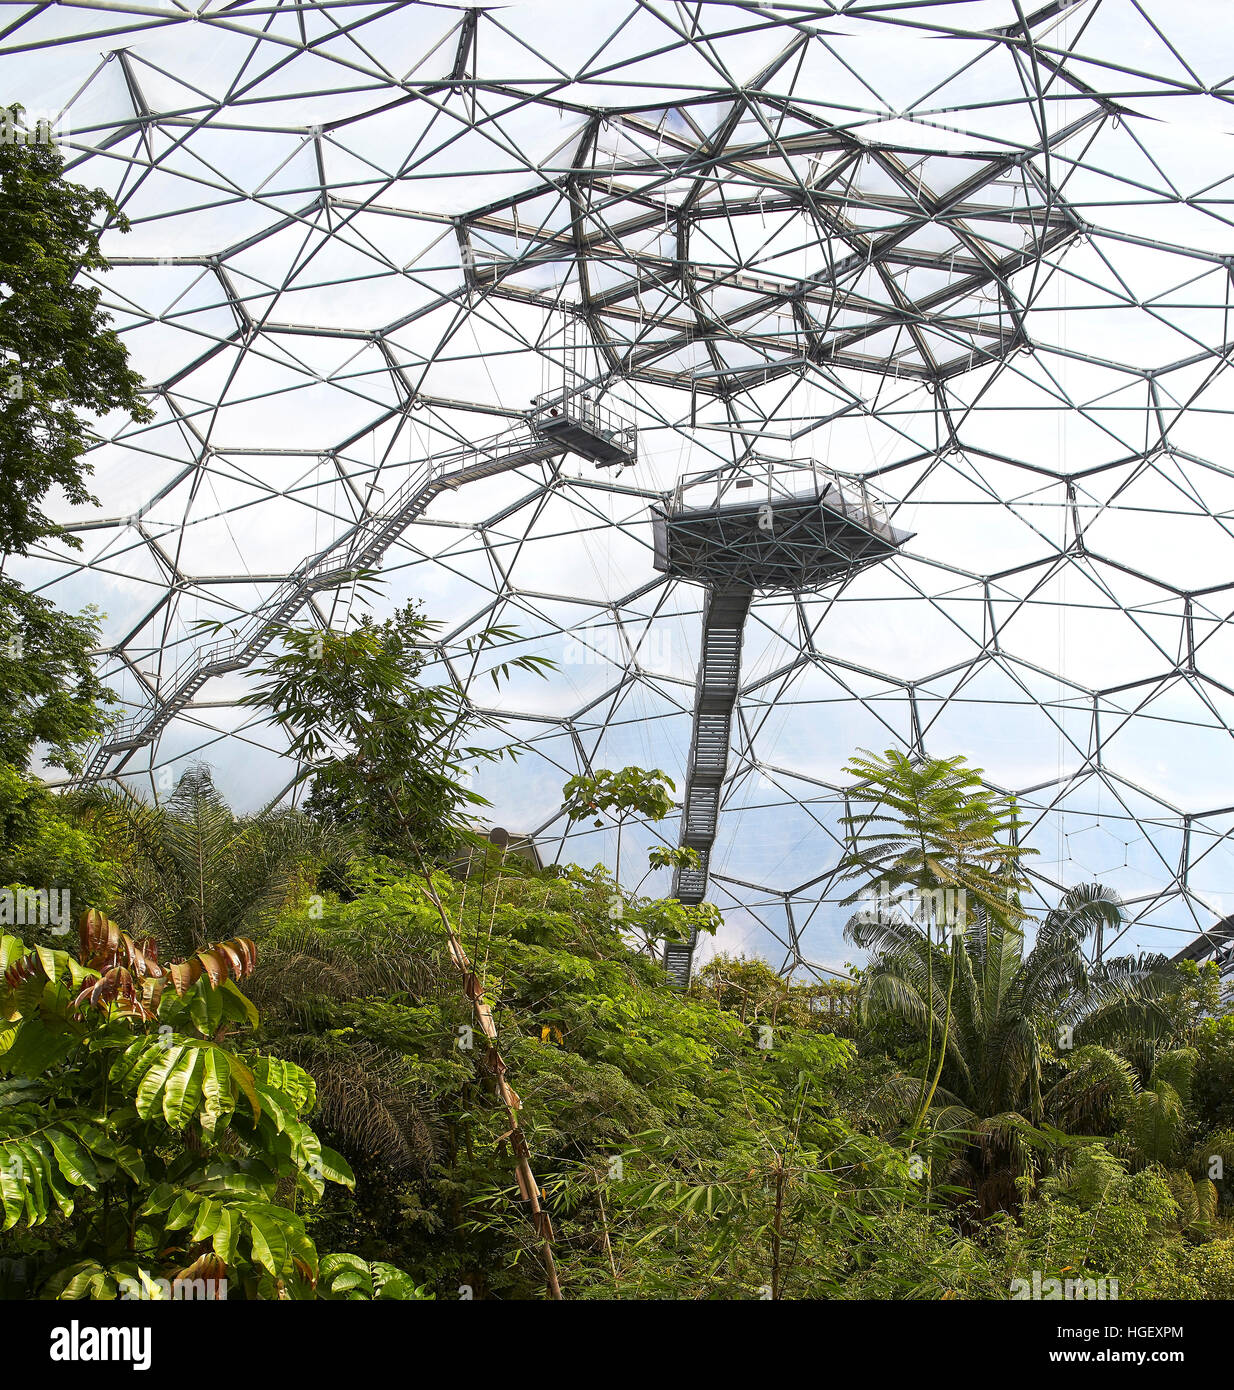 Dome interior with viewing platform and  rainforest plants. Eden Project, Bodelva, United Kingdom. Architect: Grimshaw, 2016. Stock Photo